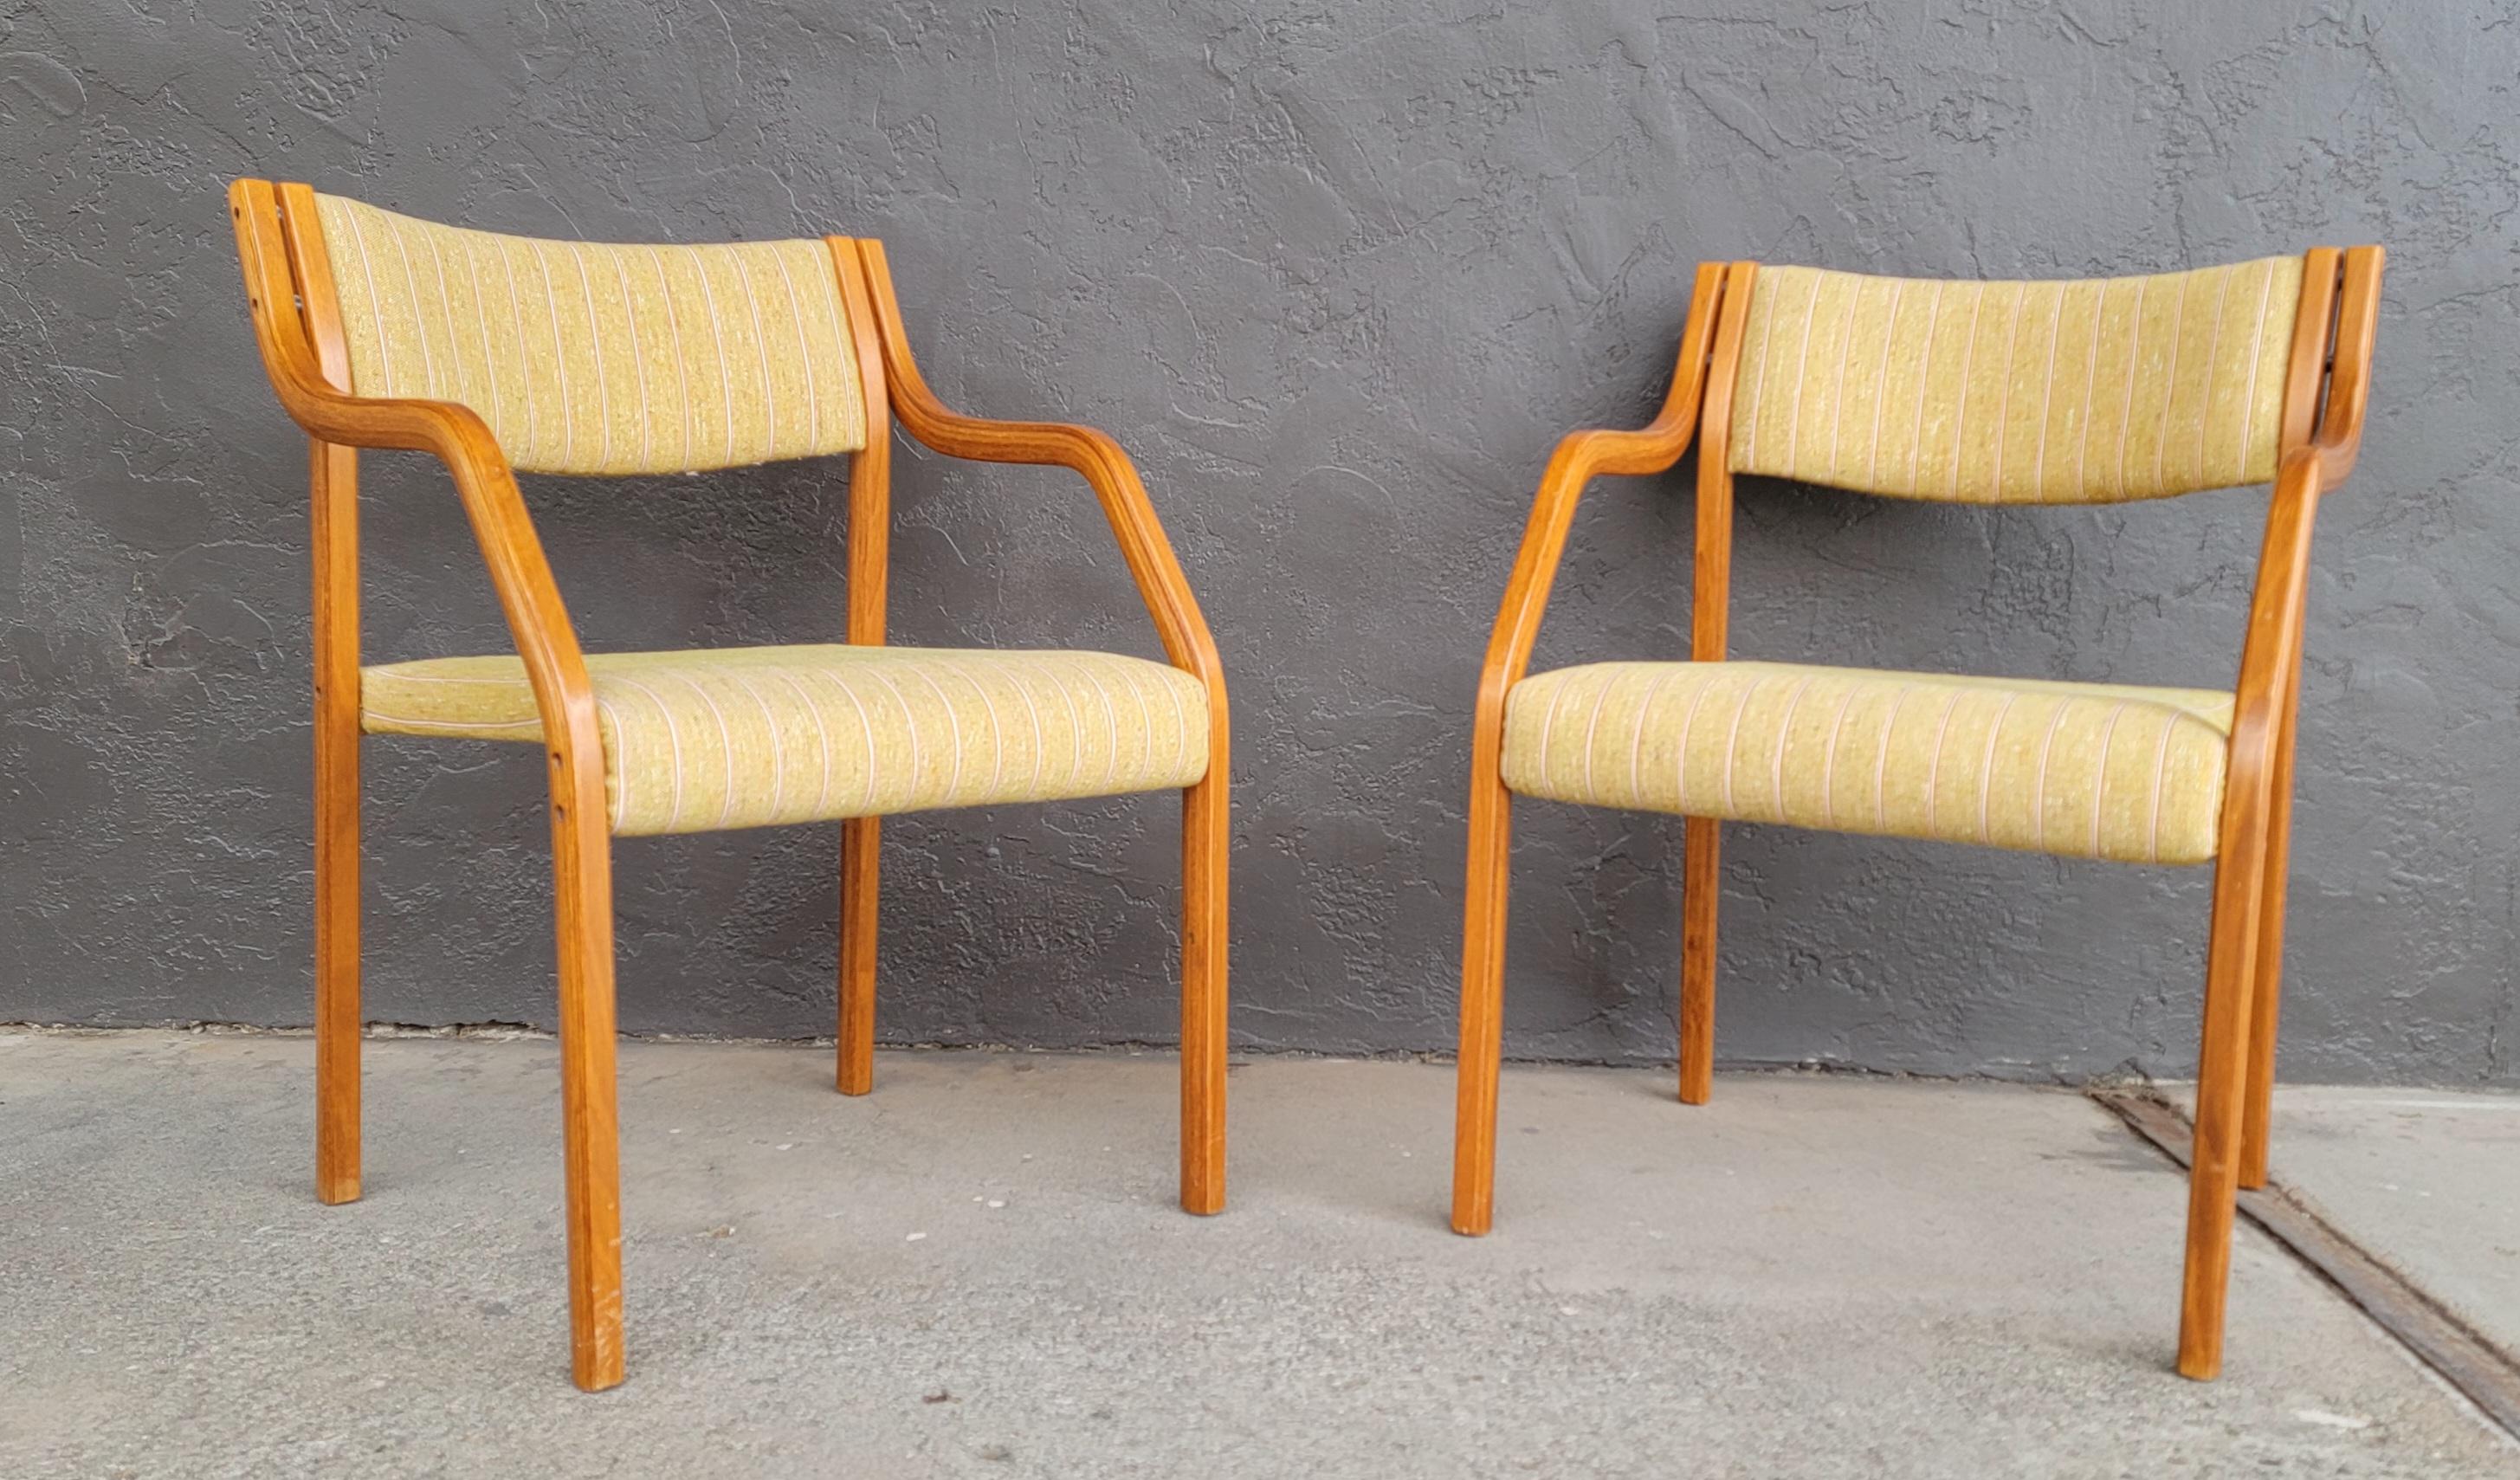 Unusual pair of upholstered bentwood armchairs resembling the works of Peter Hvidt, but I have been unable to identify a maker or designer. Steamed laminated bentwood with original upholstery in excellent original condition.